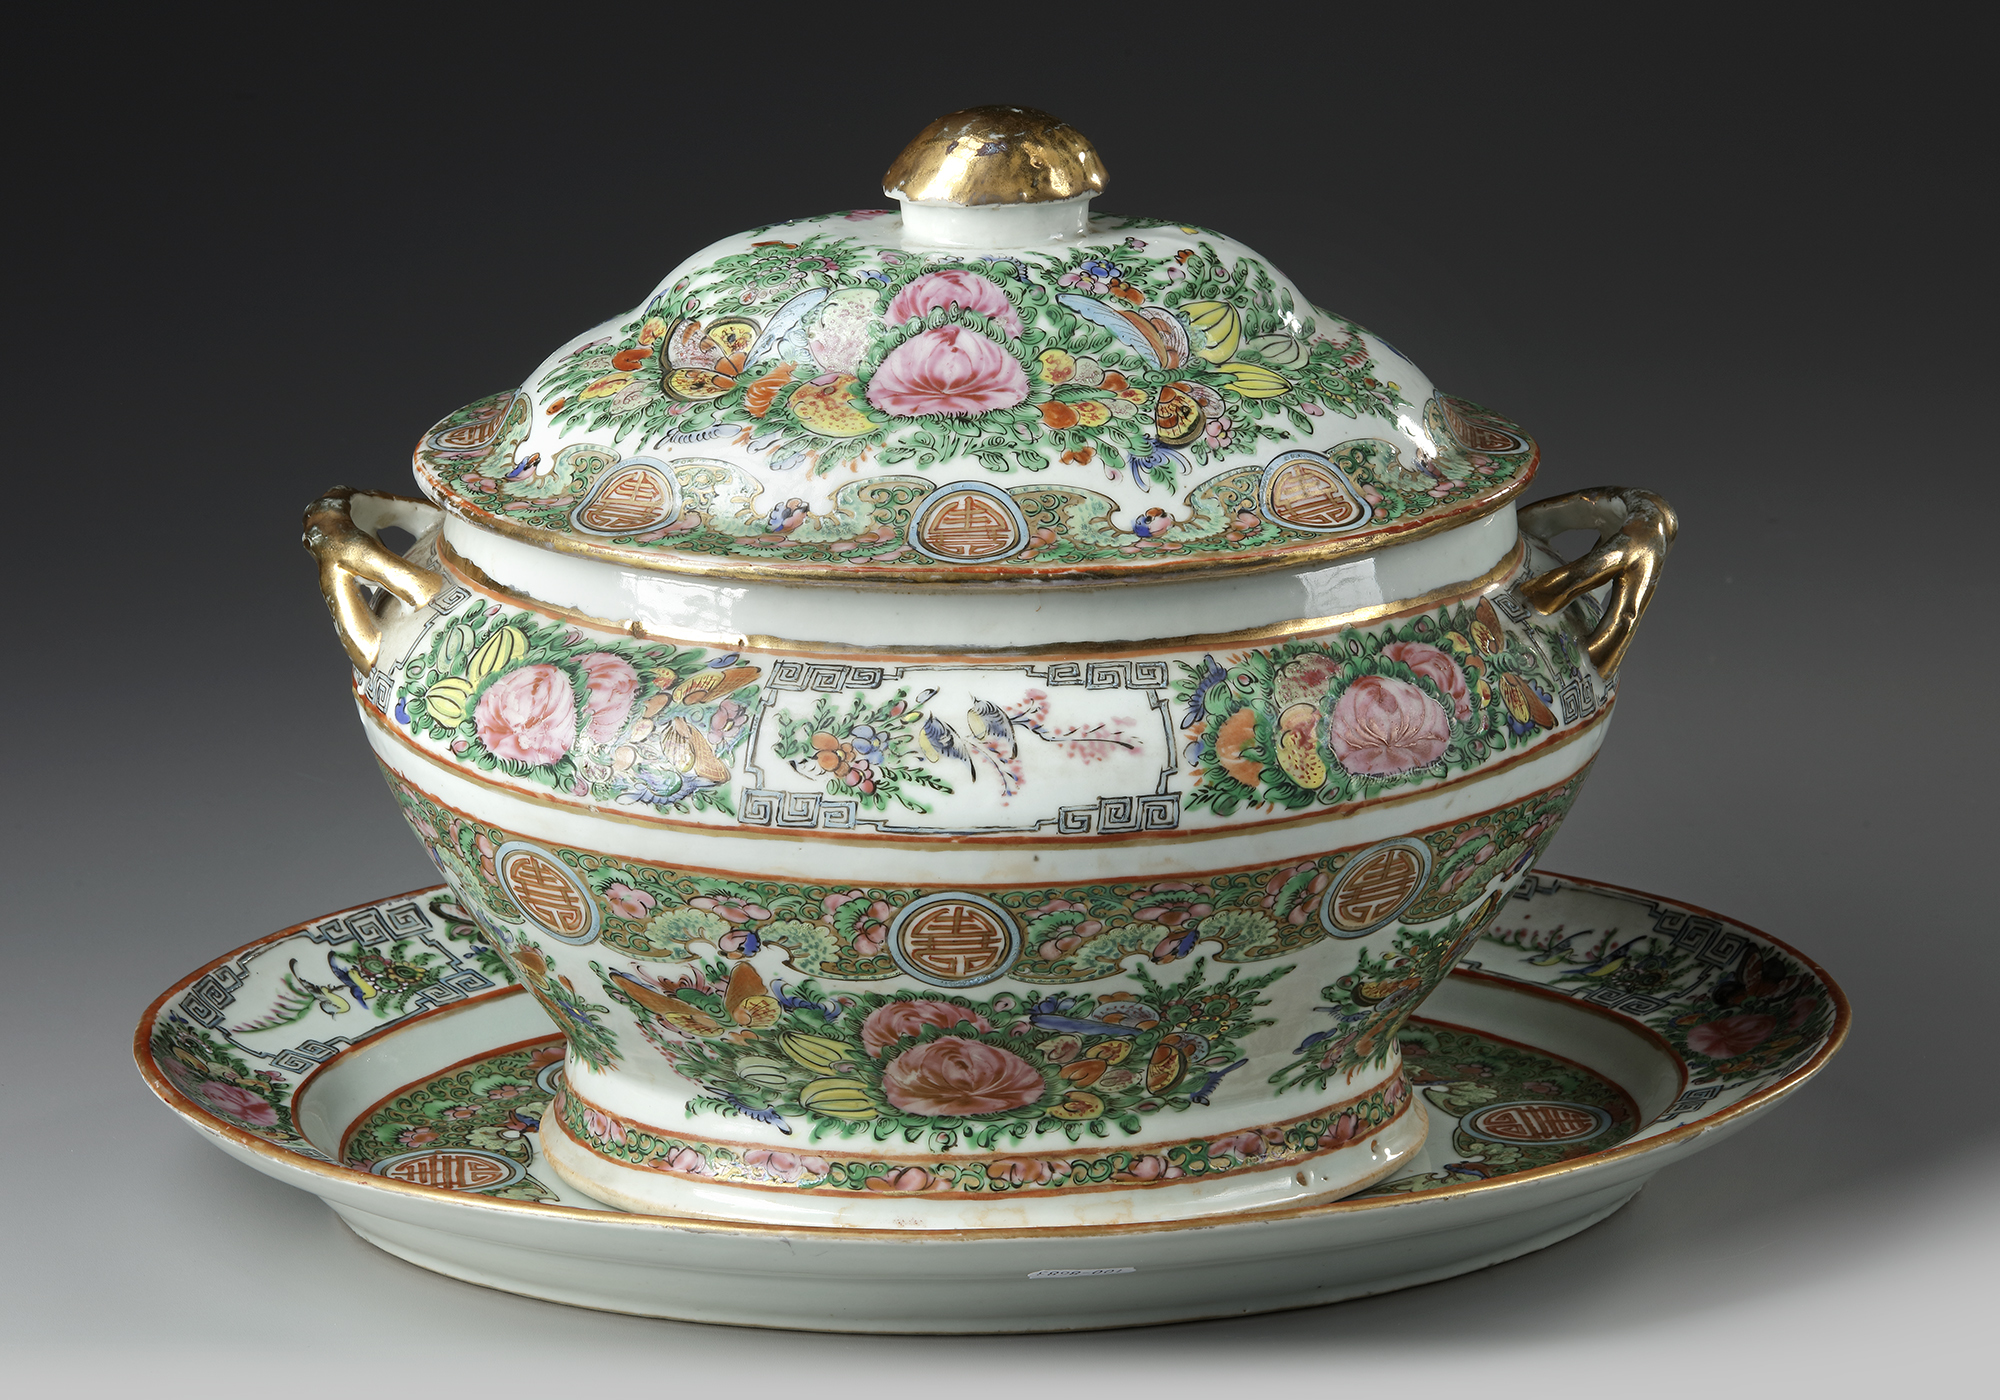 A CANTONESE FAMILLE ROSE TUREEN, COVER AND STAND, 19TH CENTURY - Image 2 of 6